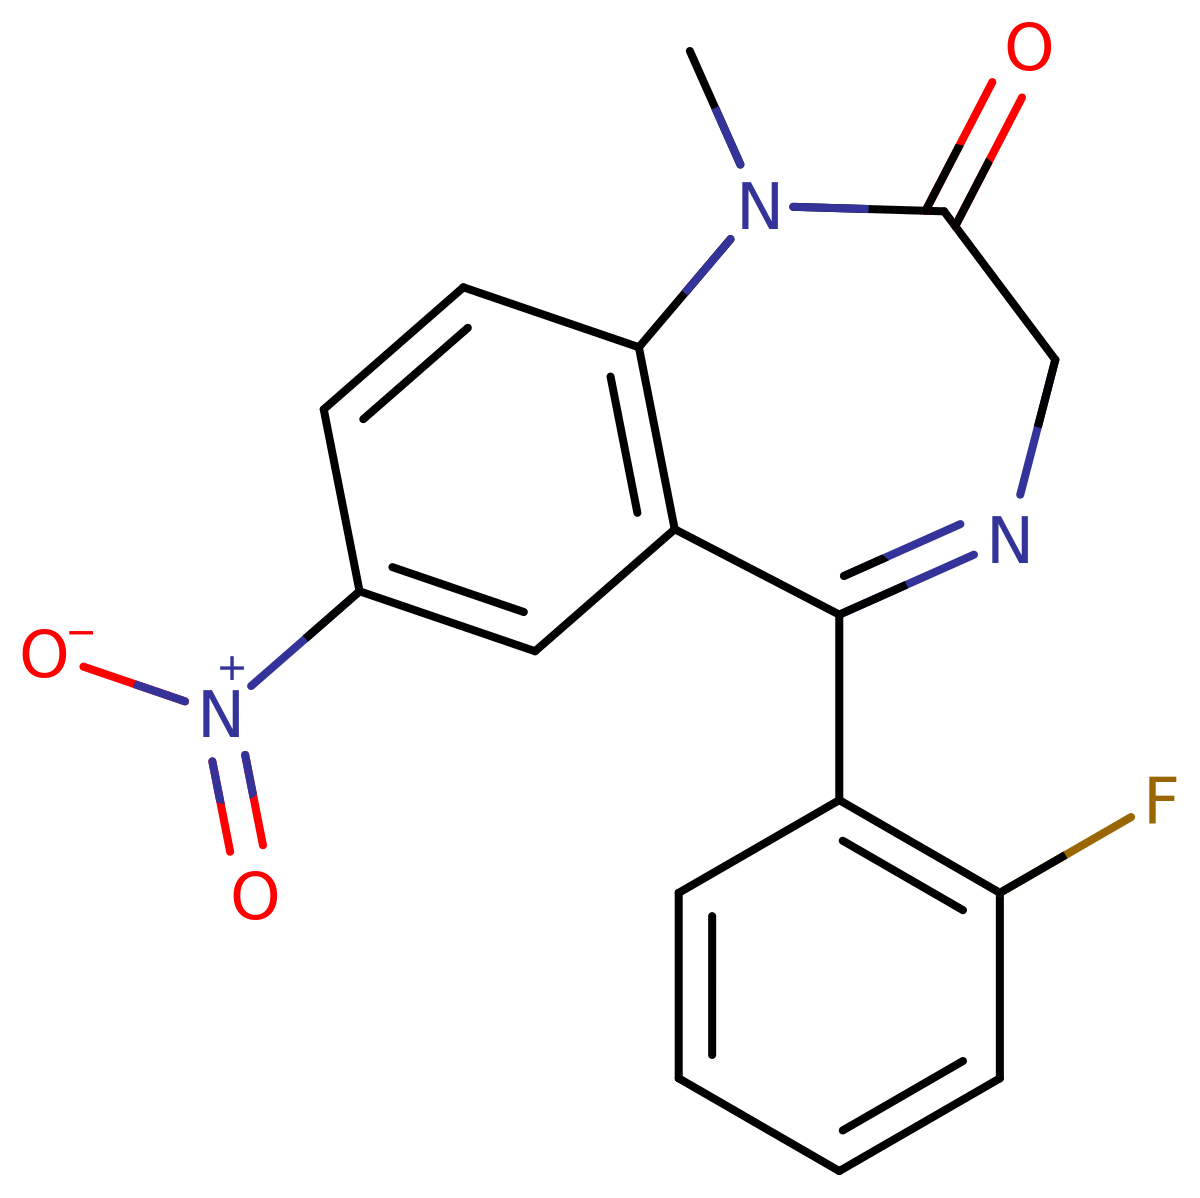 Chemical structure of the benzodiazepine (Flunitrazepam) that, together